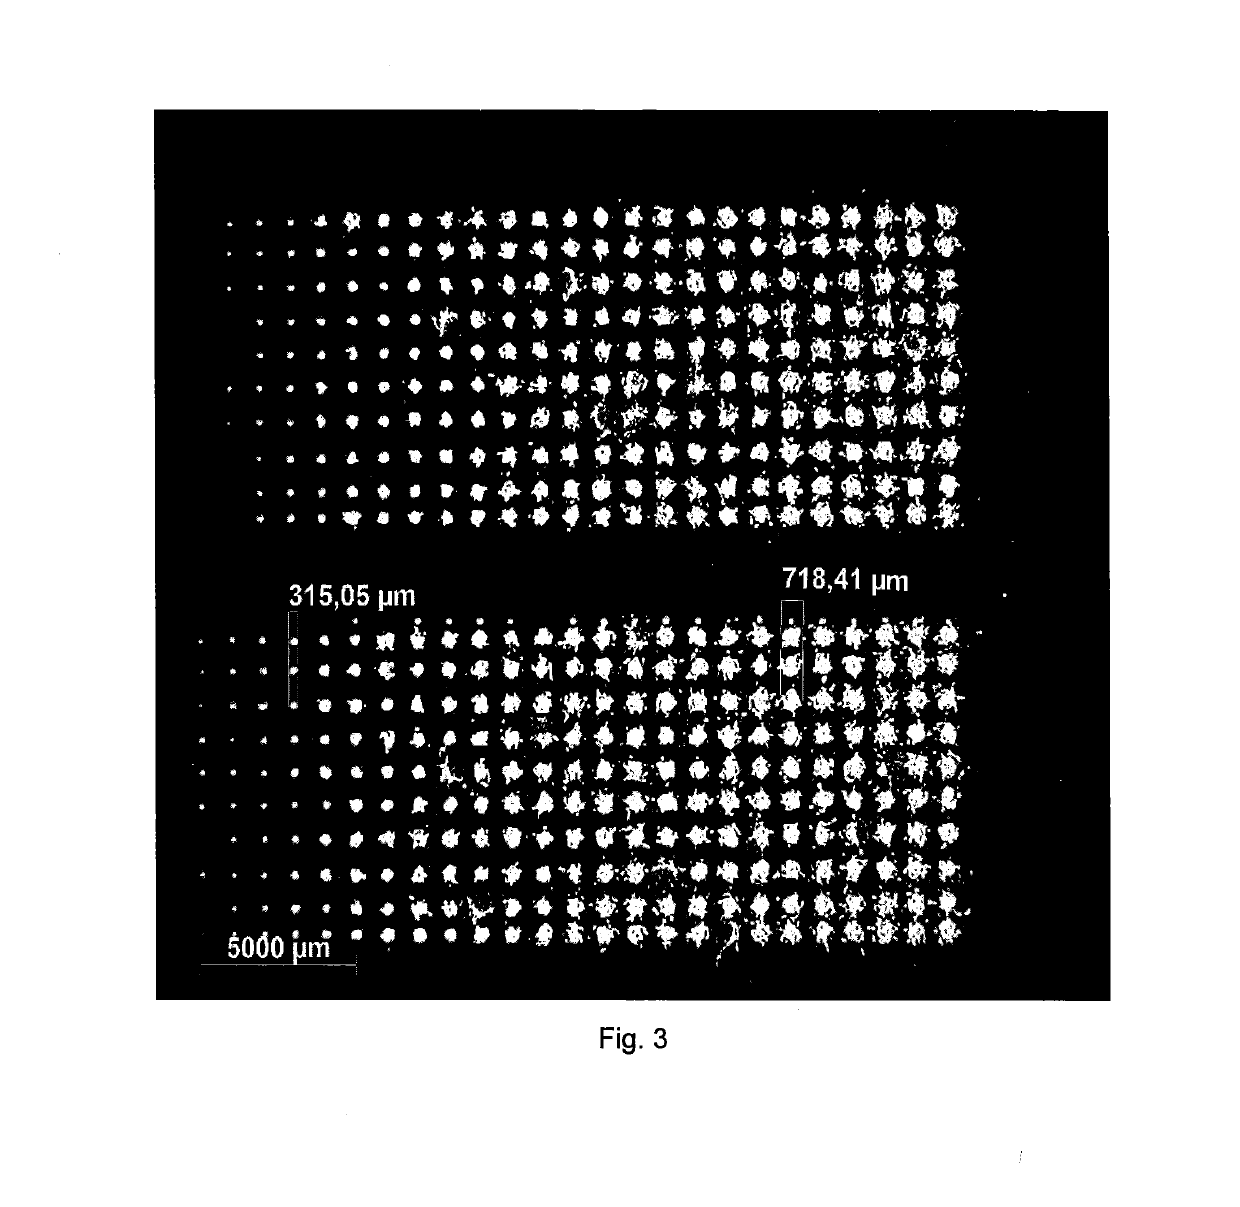 Composition Suitable for Application with Laser Induced Forward Transfer (LIFT)